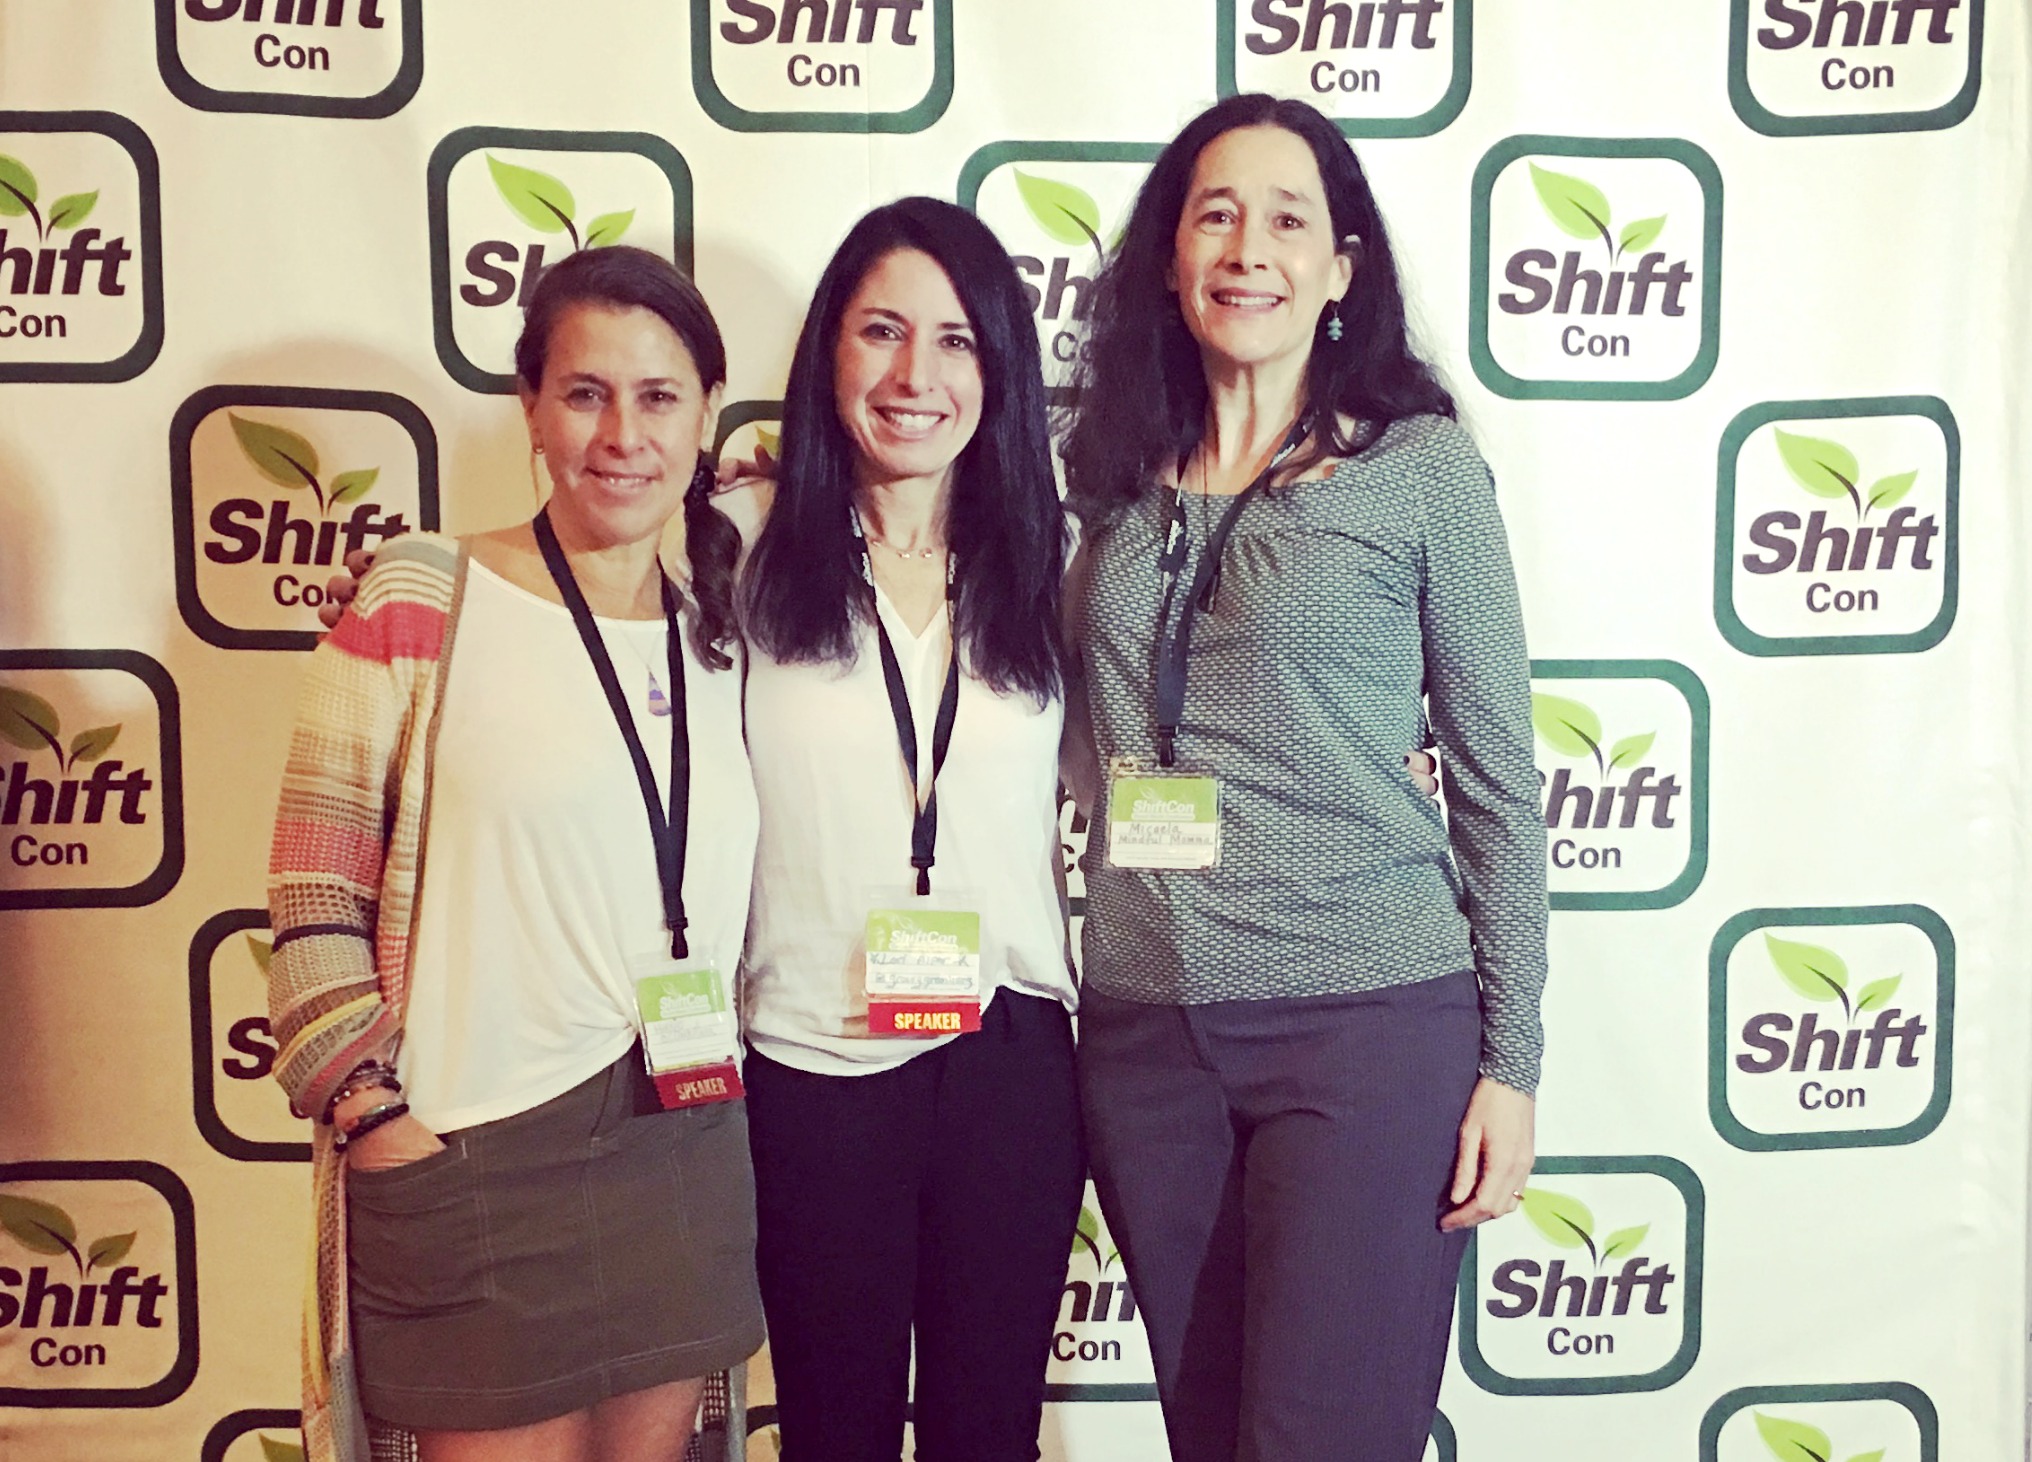 7 (More) Things I Learned at ShiftCon